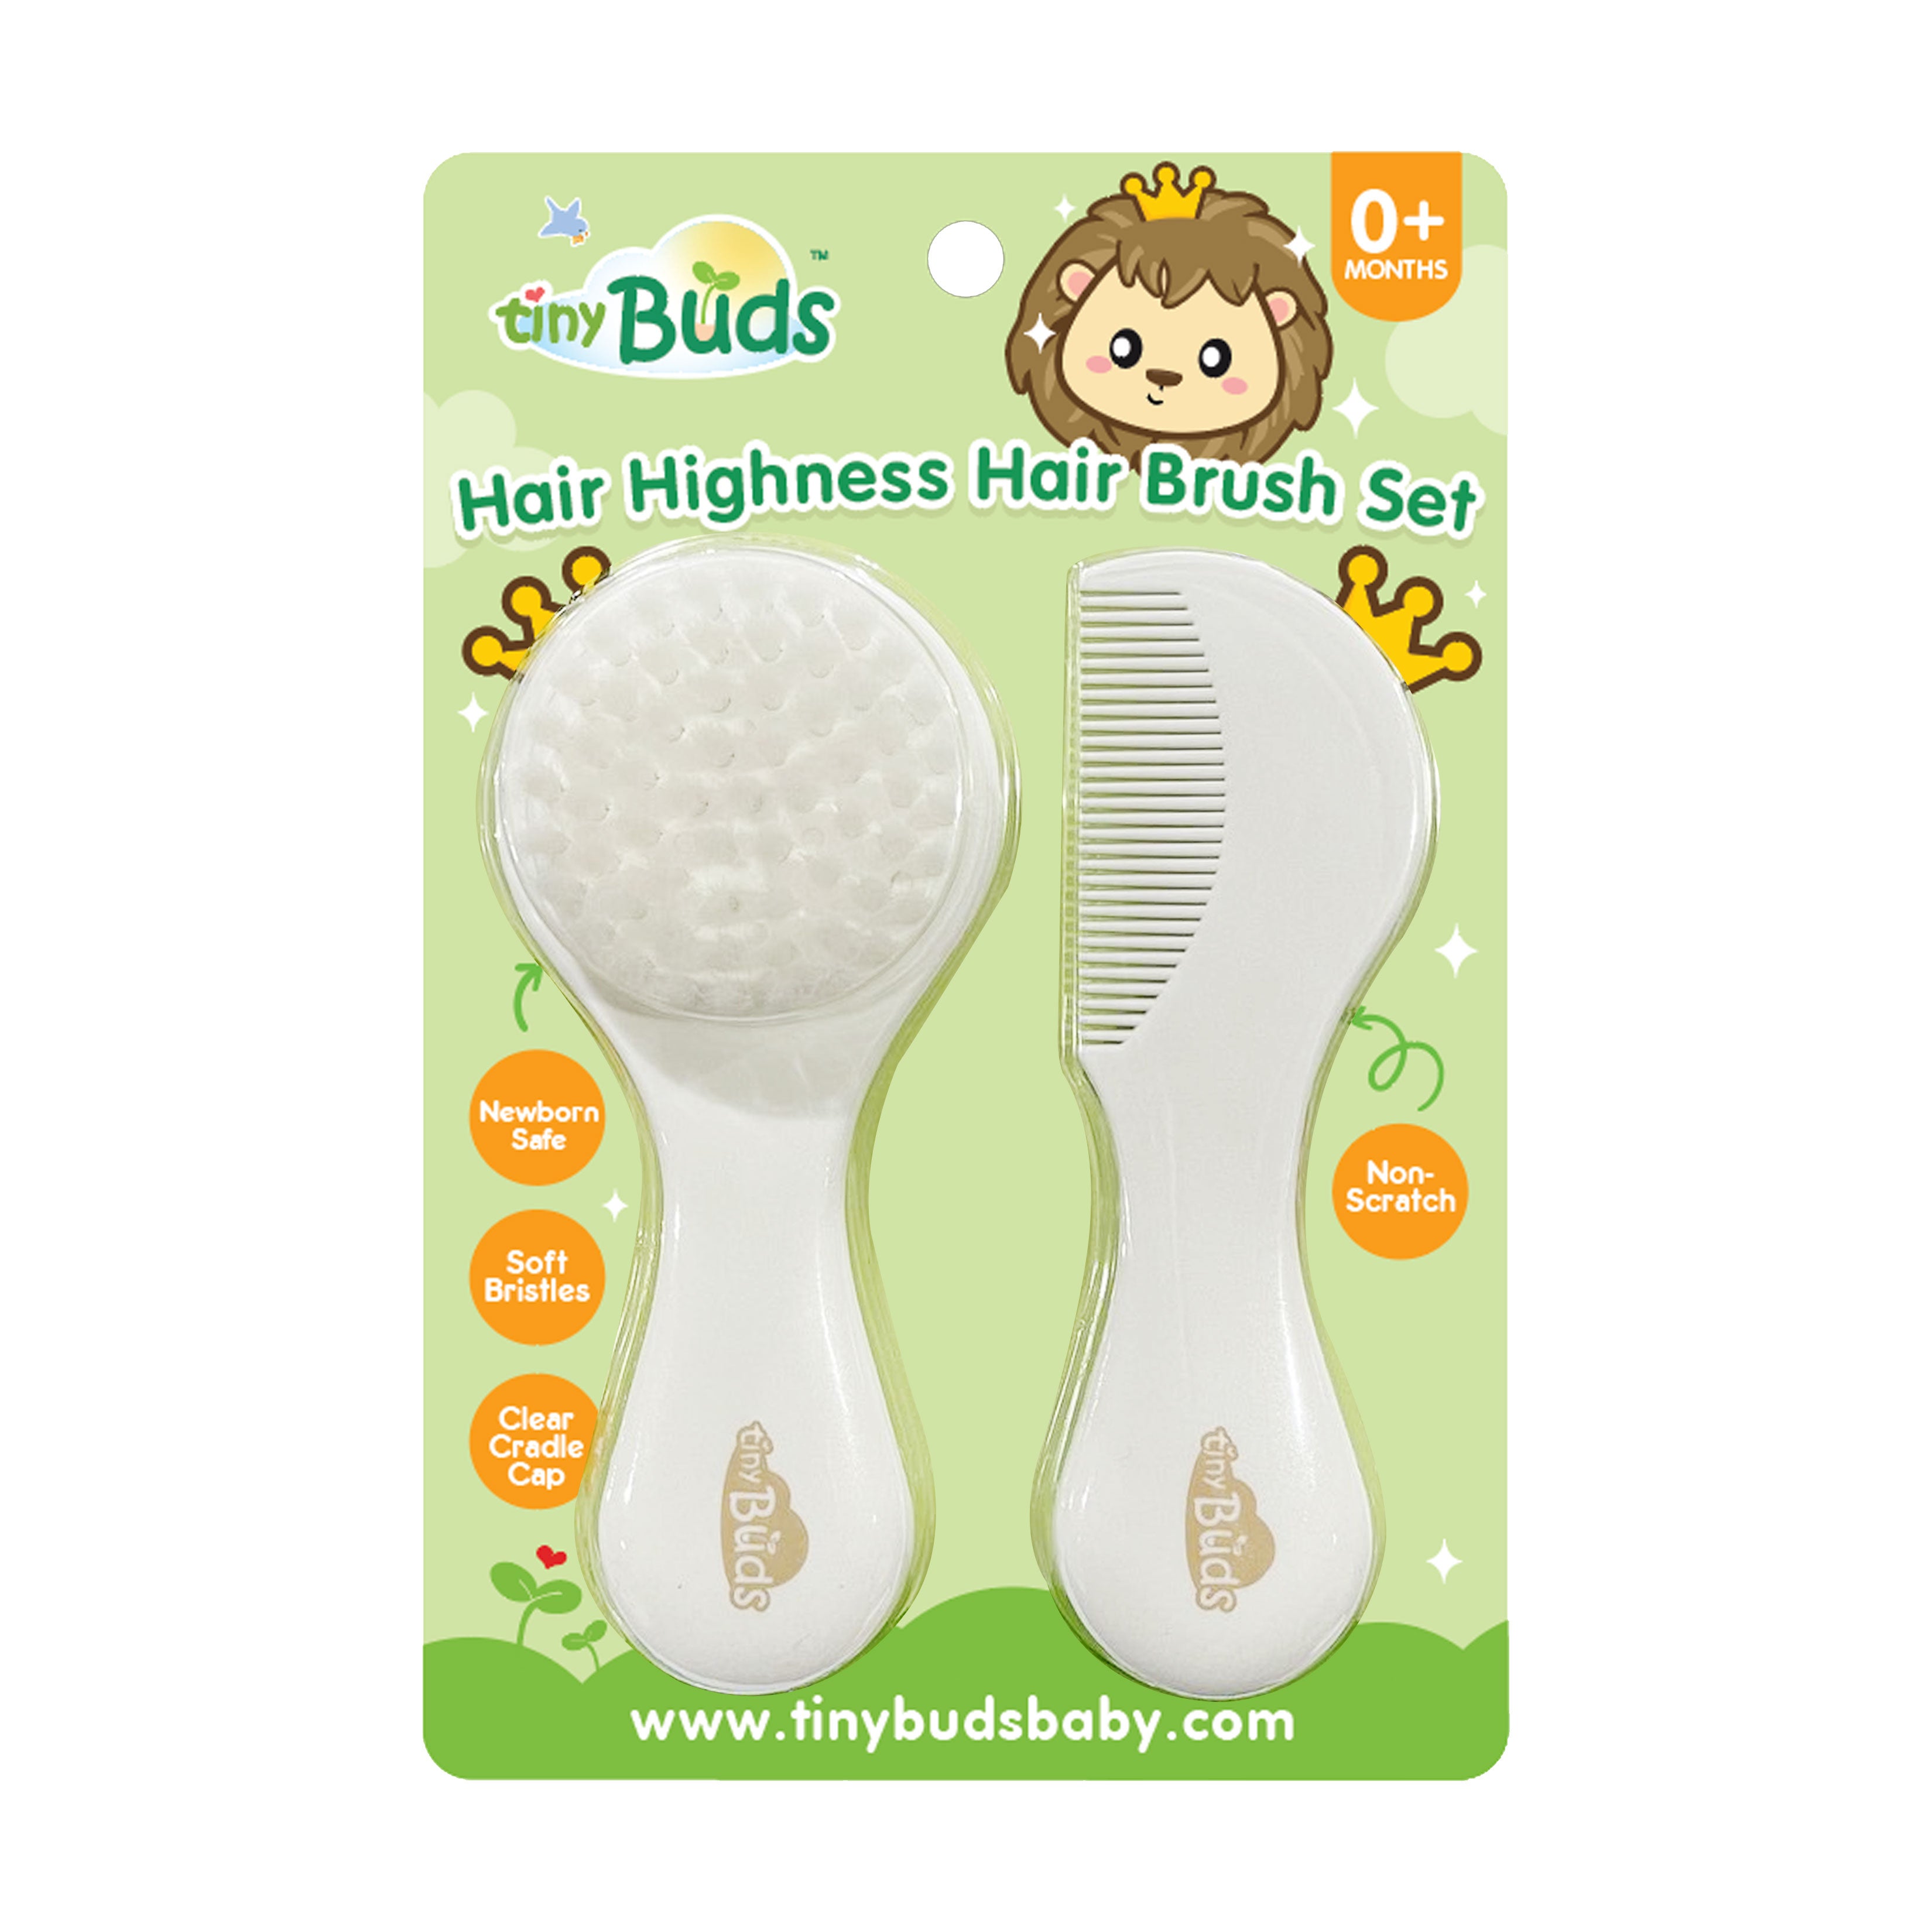 The Baby Store Ph - Tiny Buds Baby Bottle Brush 3-in-1 Set Tiny Buds Baby Bottle  Brush is made from 100% Safe & Eco-Friendly Silicon. The soft but durable  bristles are designed